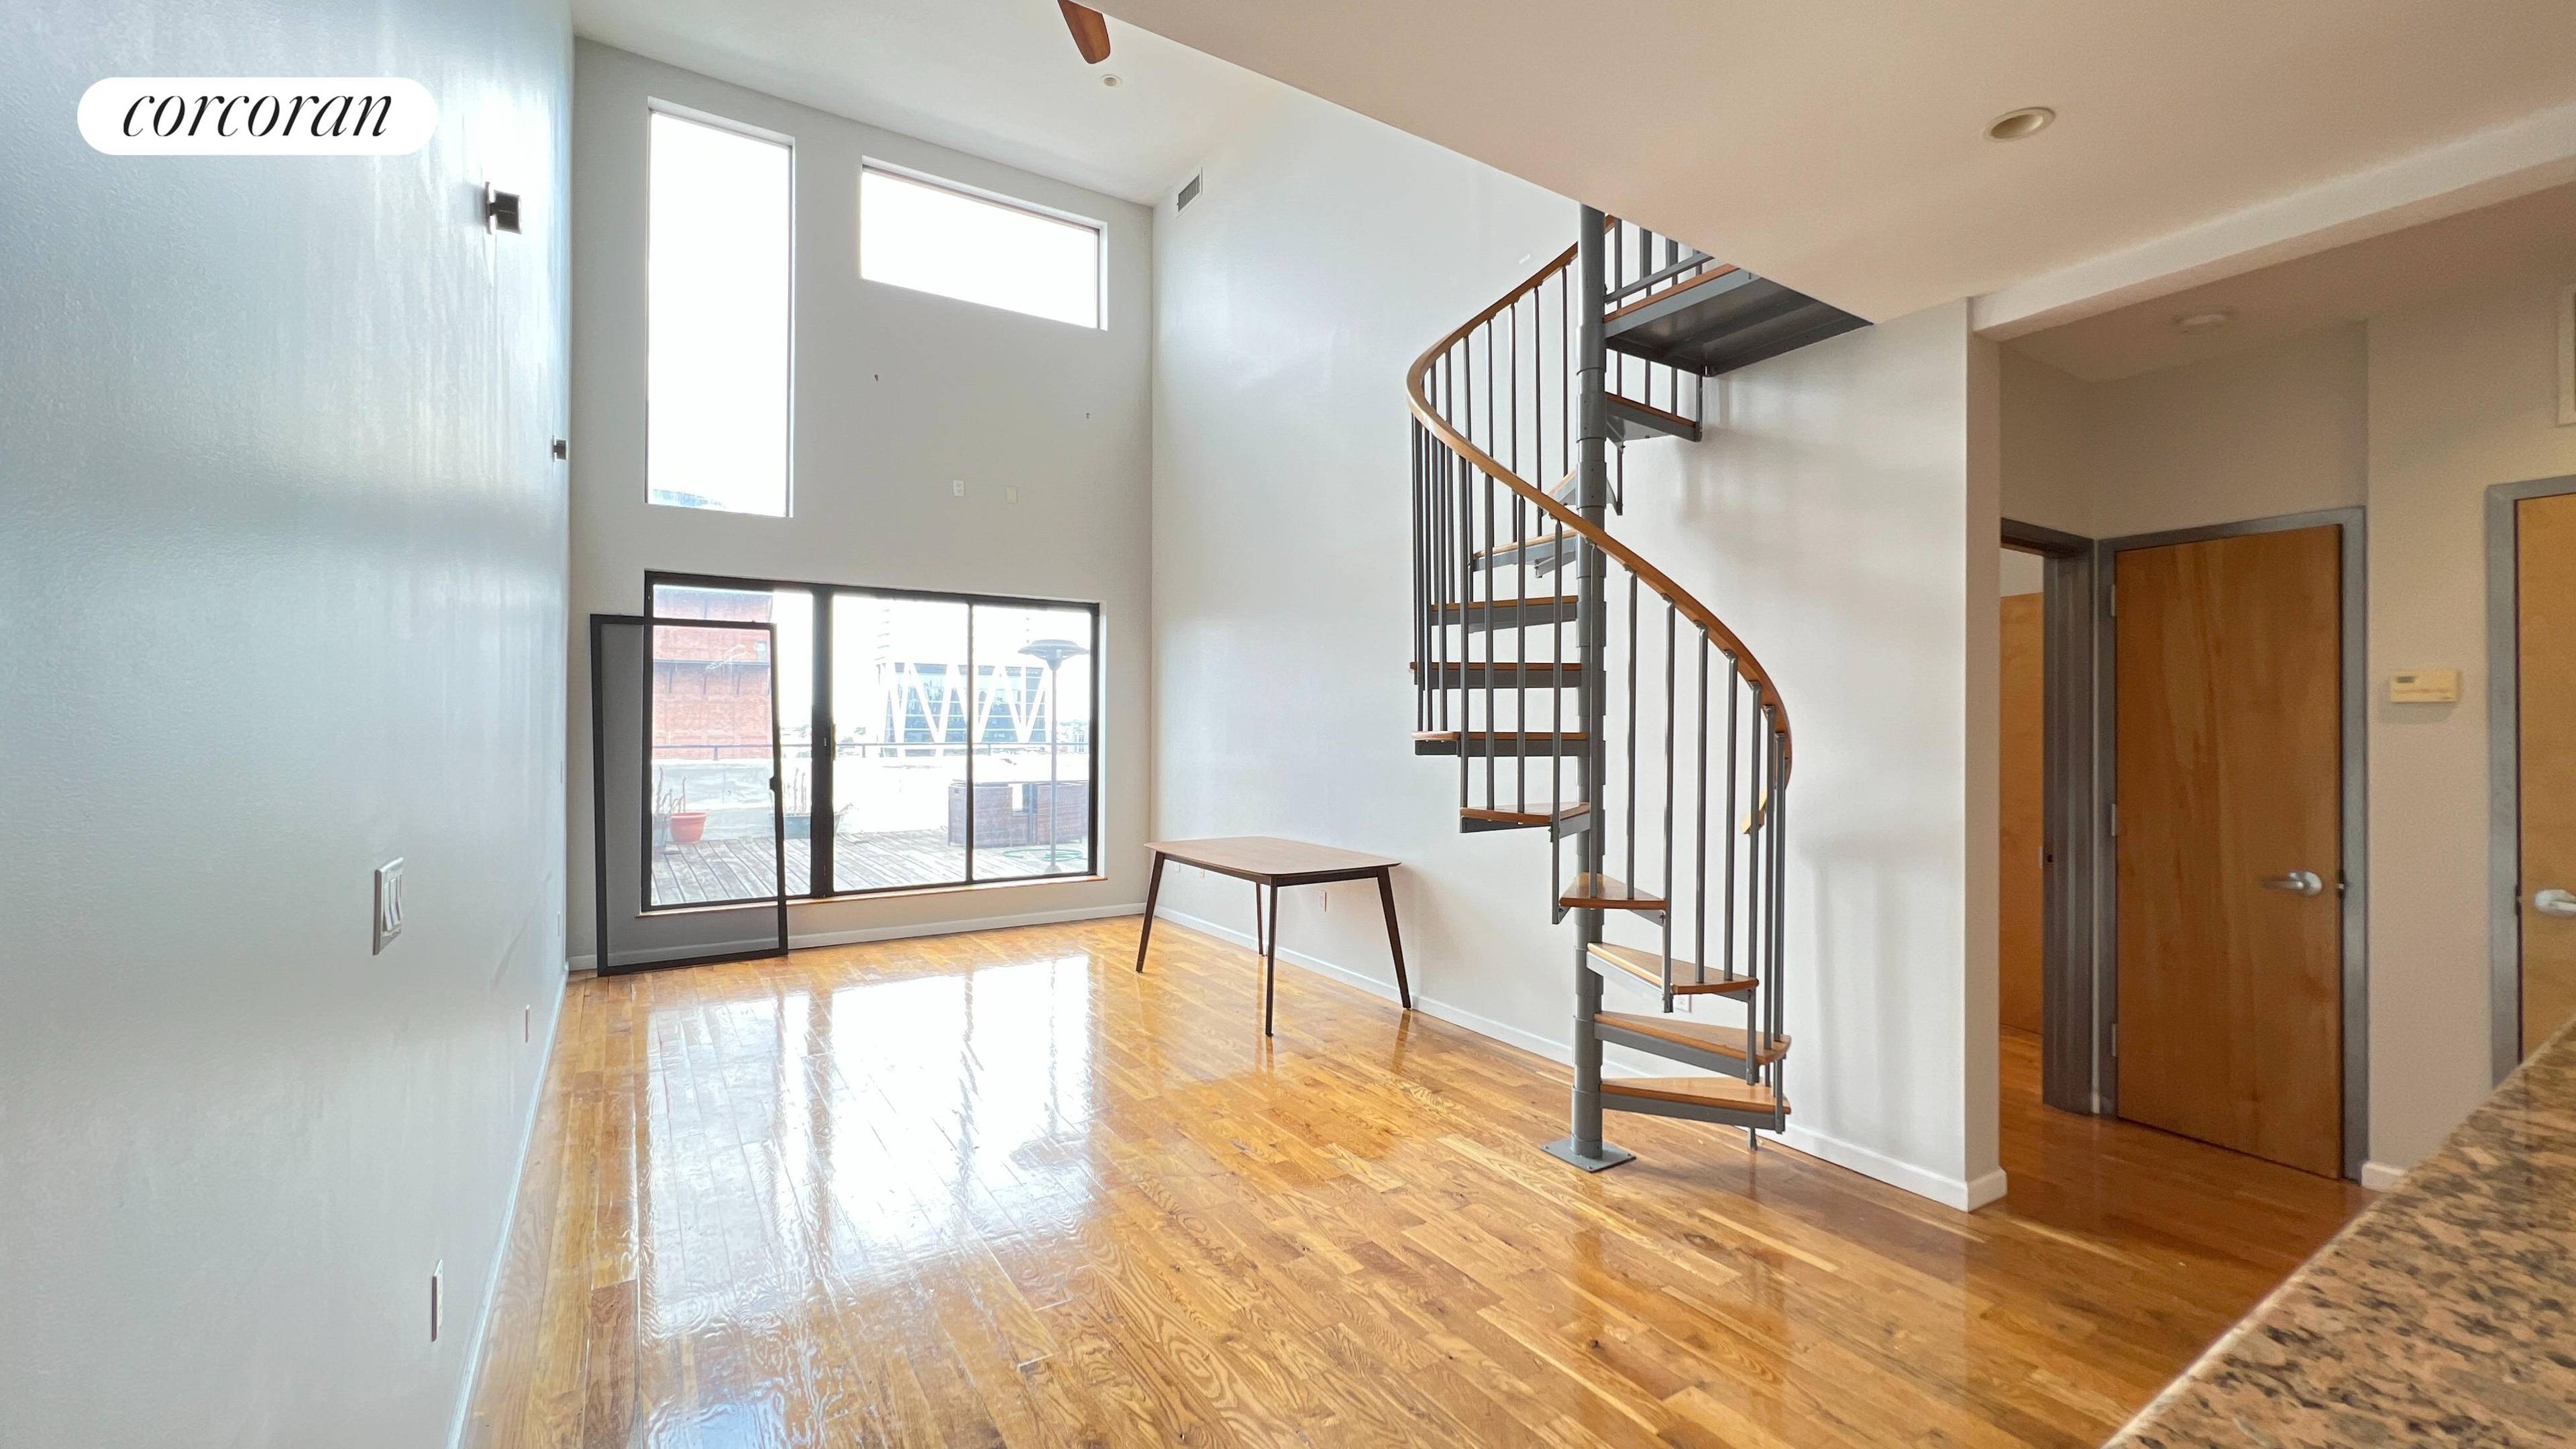 Gorgeous Penthouse Duplex With Large Outdoor Space For Rent in the heart of North Williamsburg.